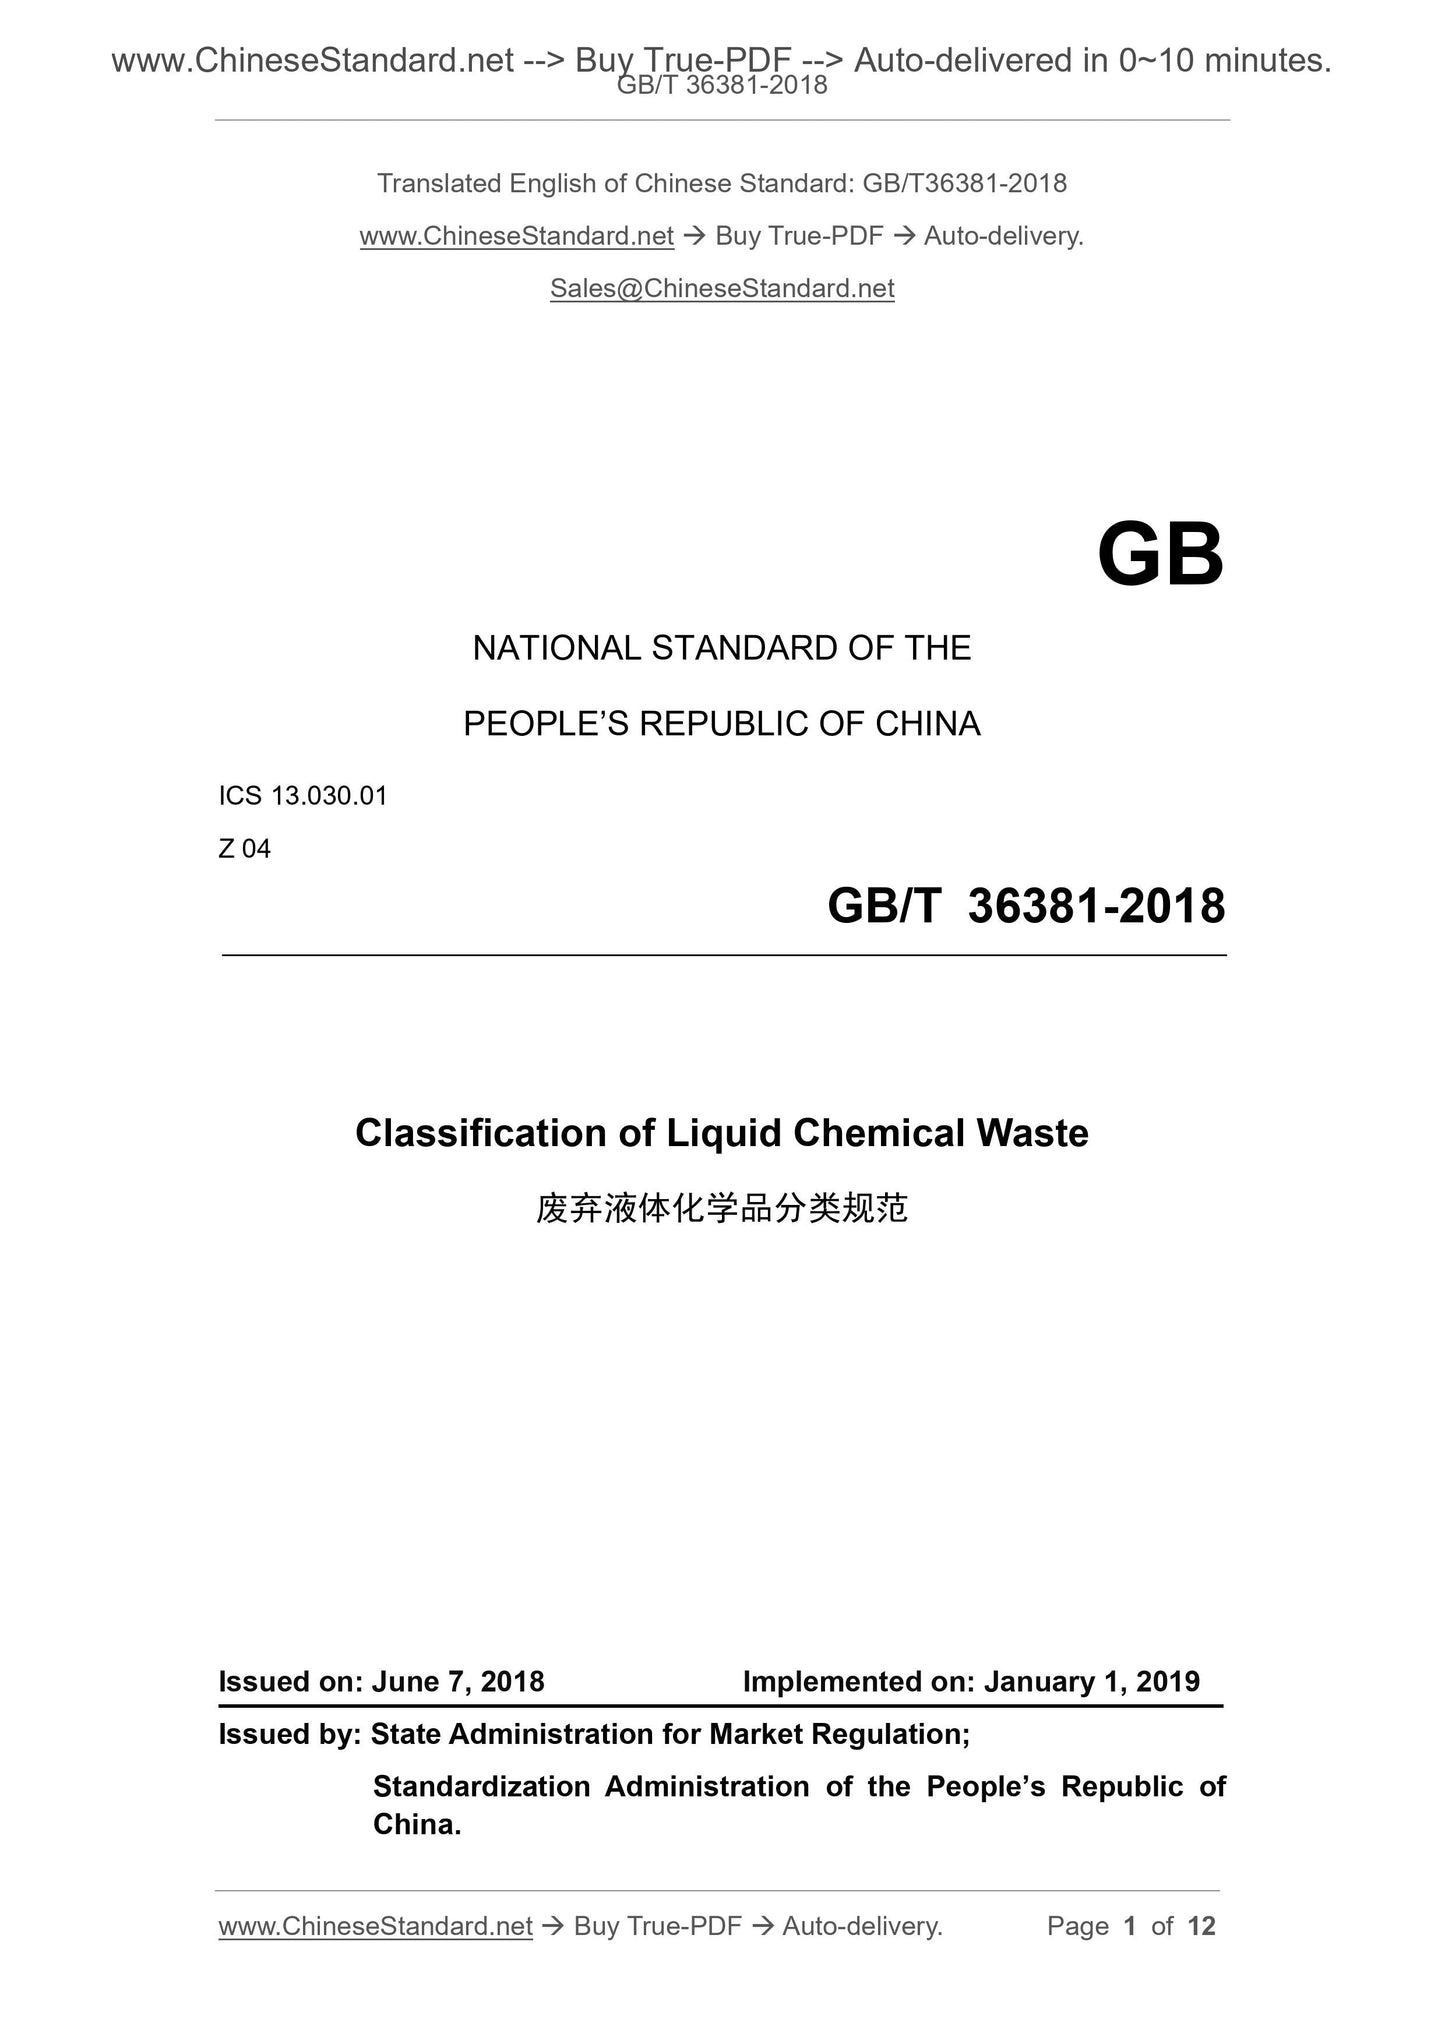 GB/T 36381-2018 Page 1